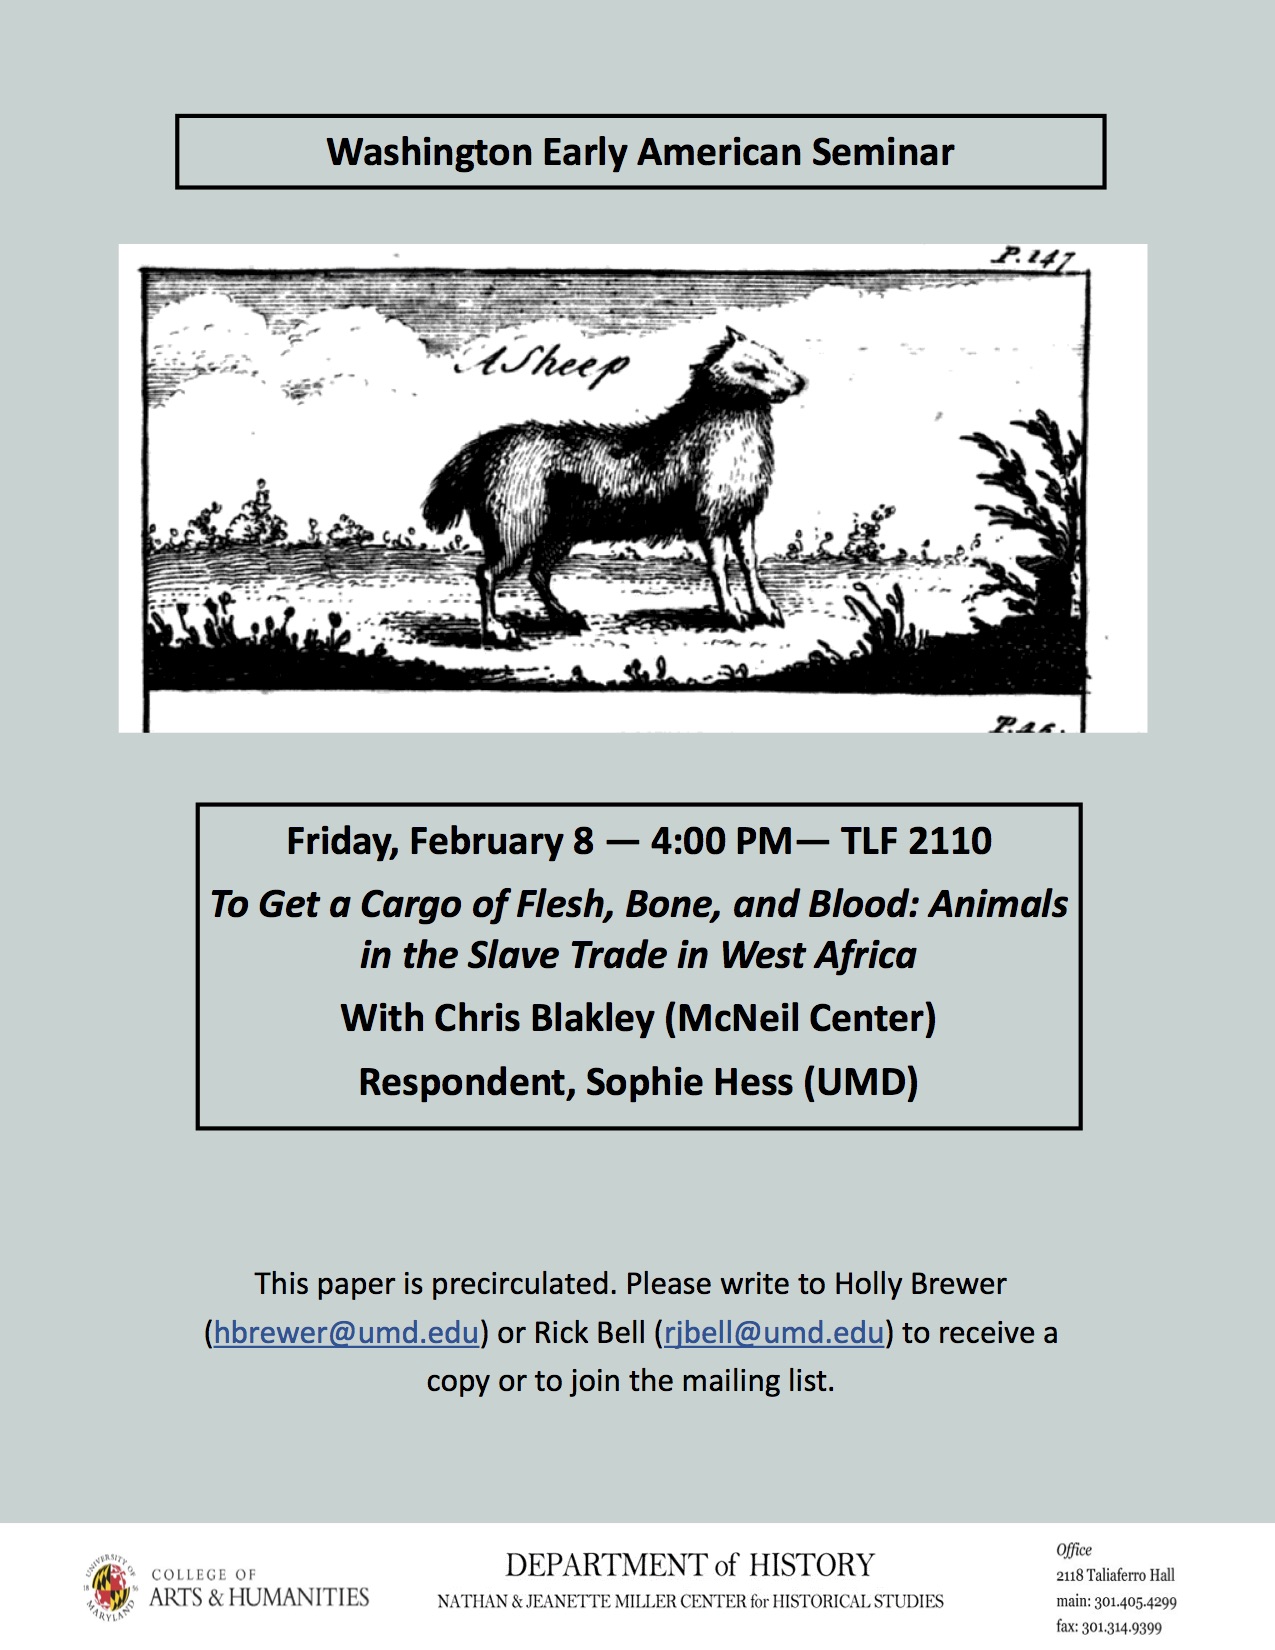 Image for event - To Get A Cargo of Flesh, Bone, and Blood: Animals in the Slave Trade in West Africa